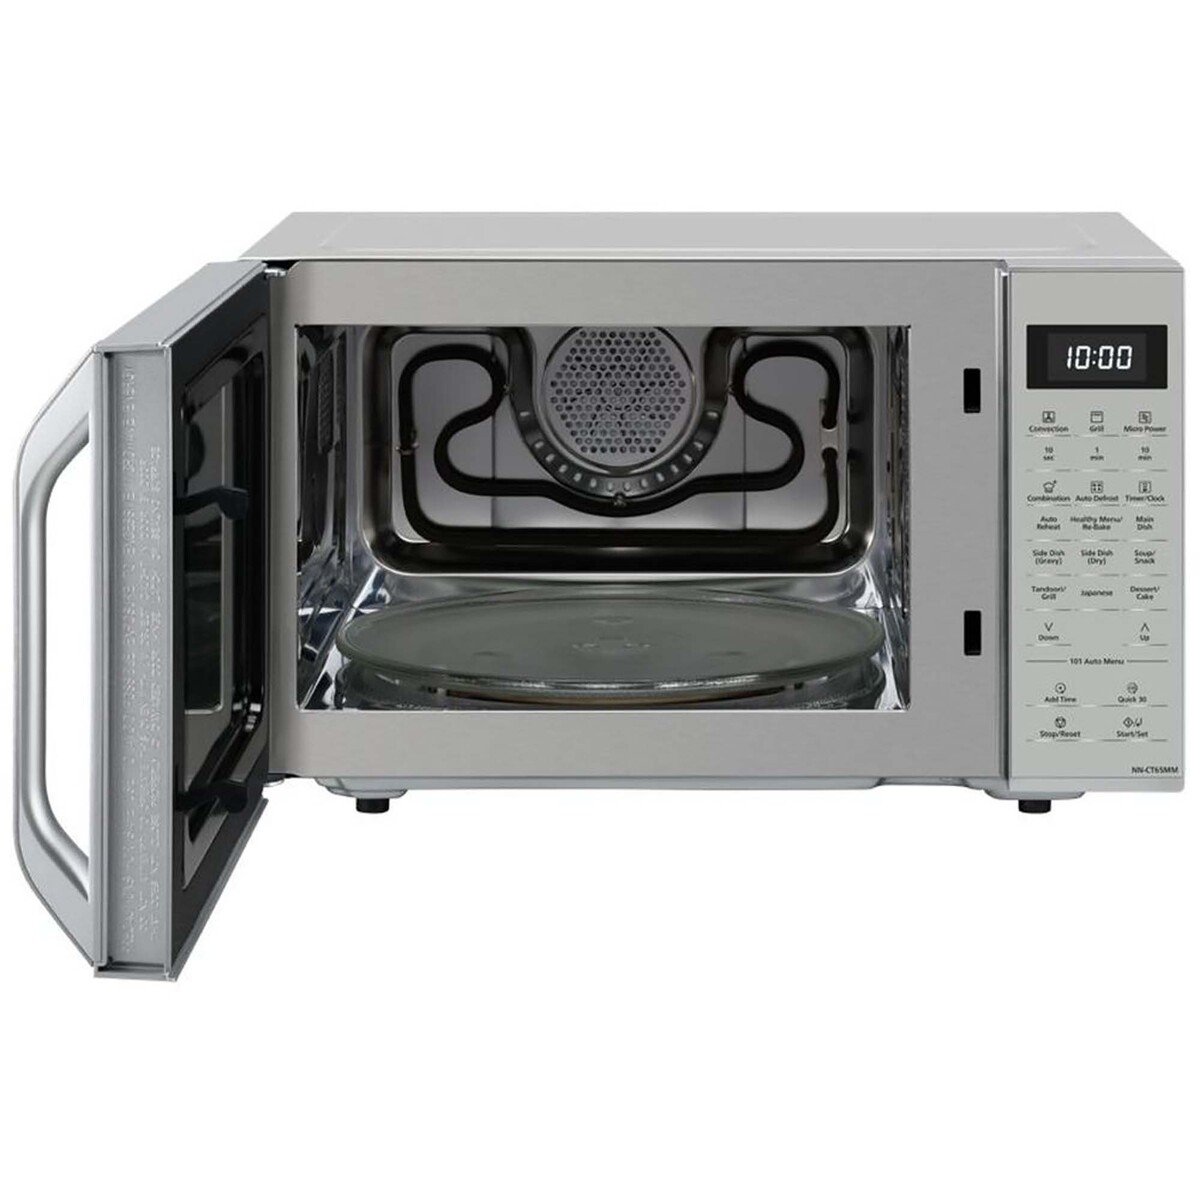 Panasonic 4-in-1 Convection Microwave Oven with Healthy Air Frying NNCT65MMKPQ 27LTR